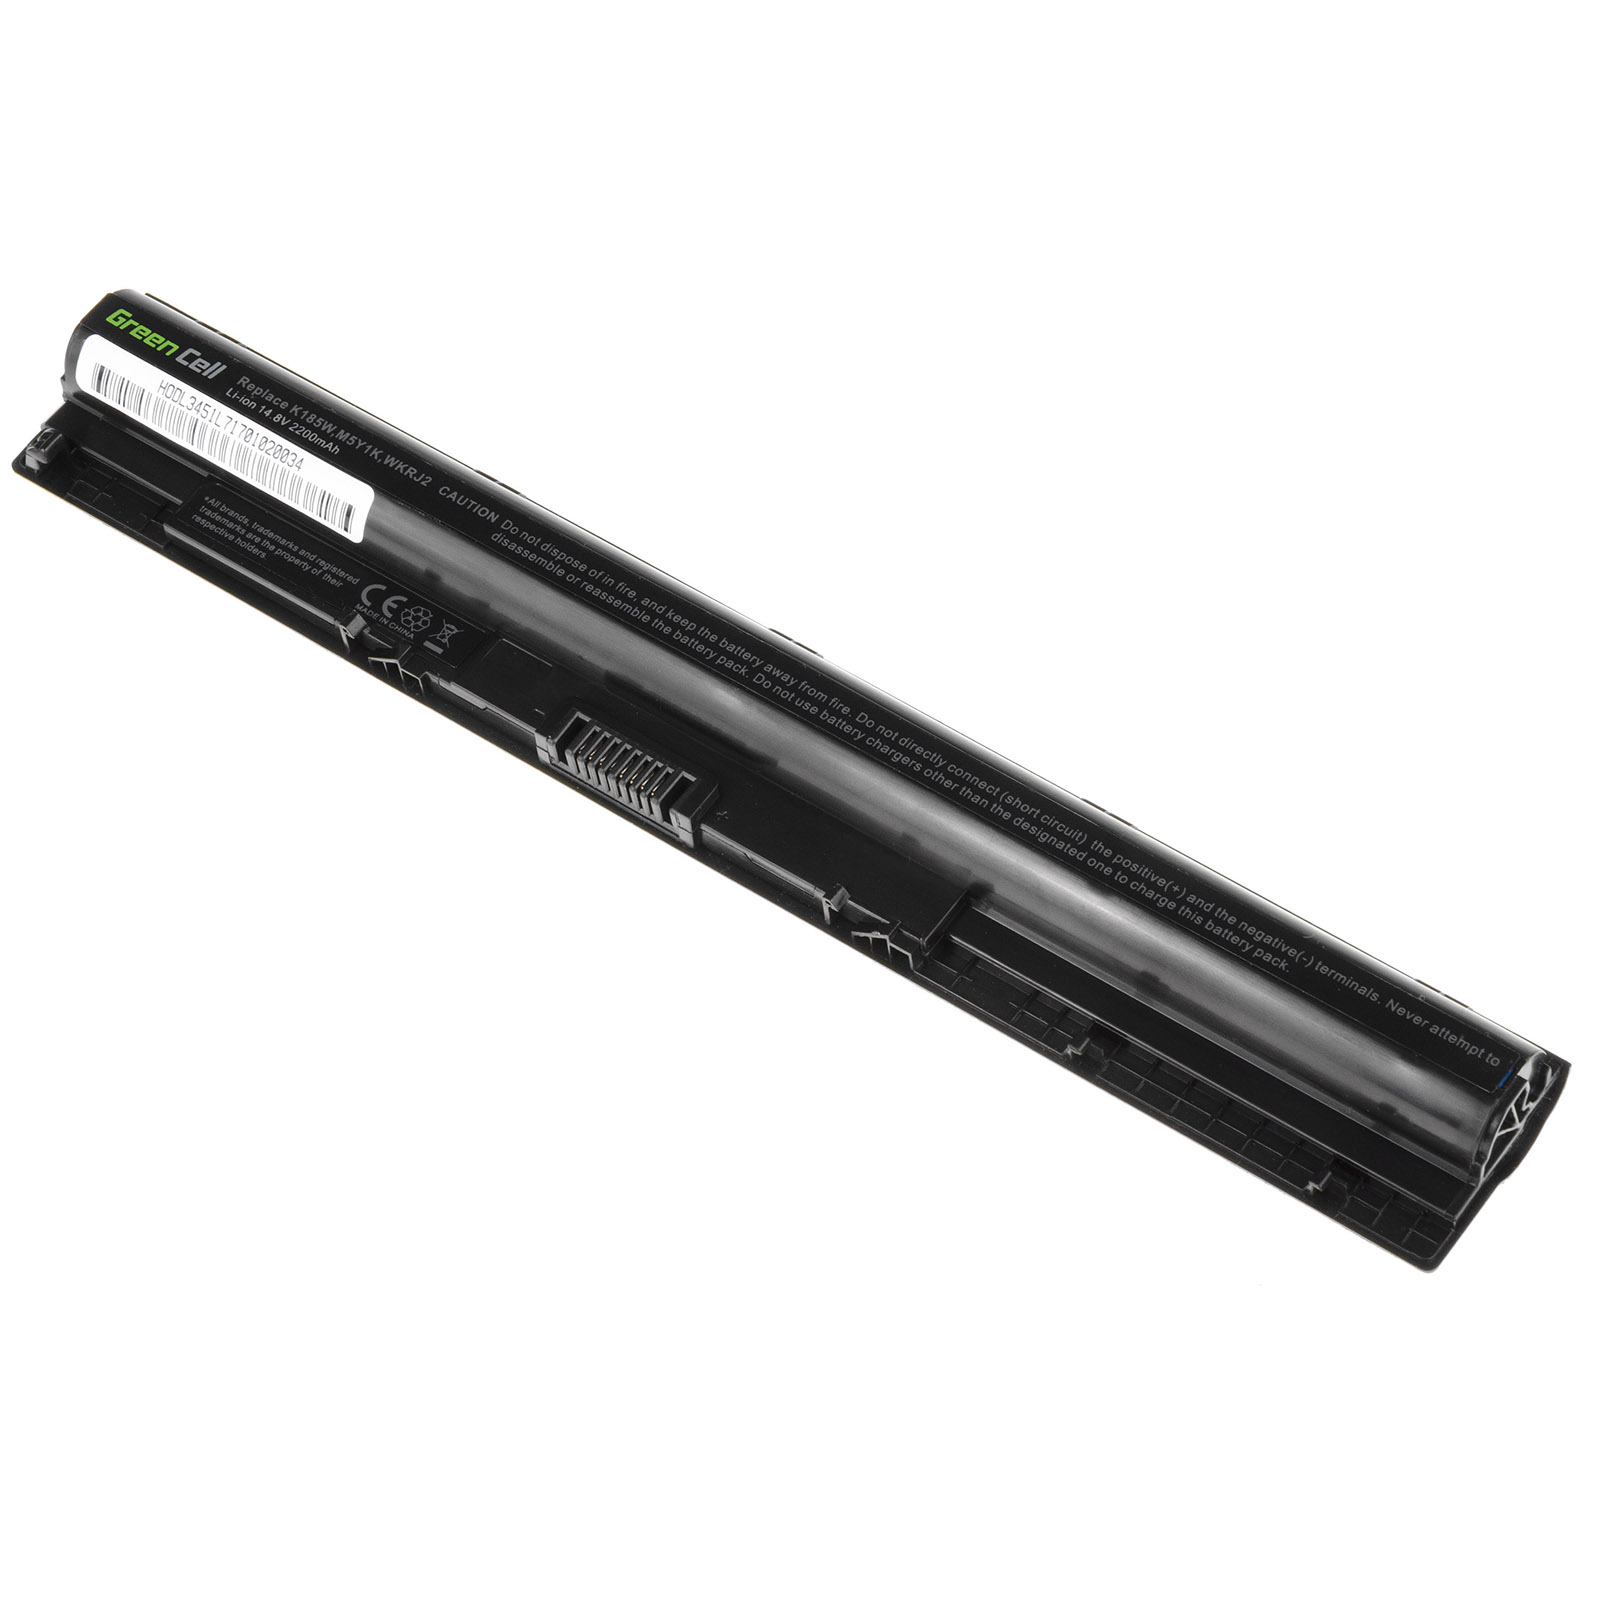 M5Y1K Dell Inspiron 15 3555 5551 5552 5555 5558 5559 compatible battery